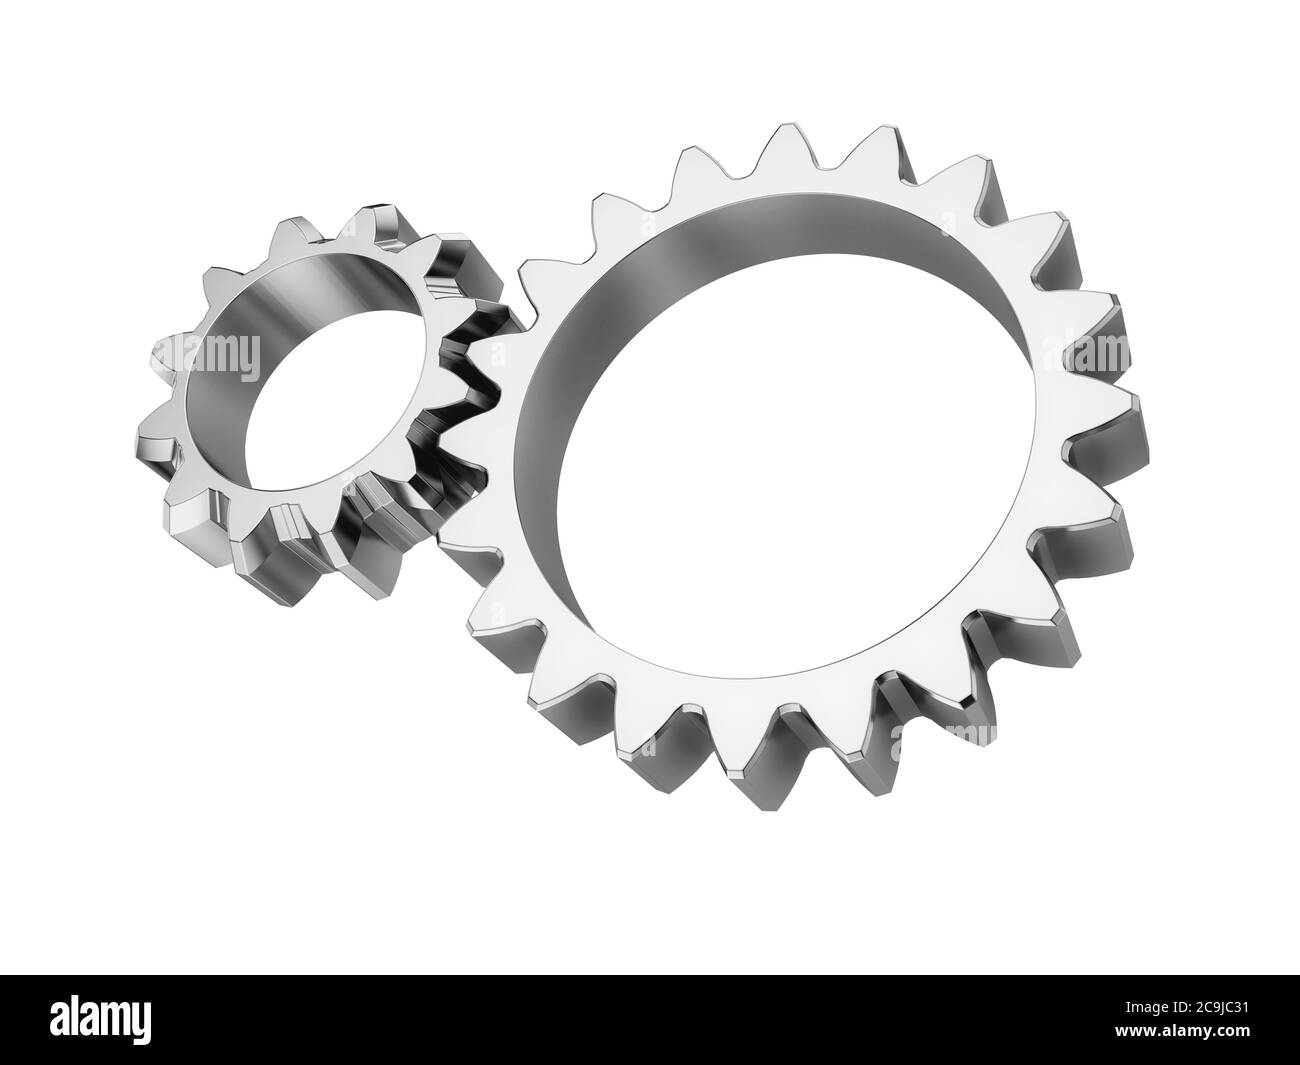 Steel gear wheels isolated on white background. 3d illustration. Stock Photo